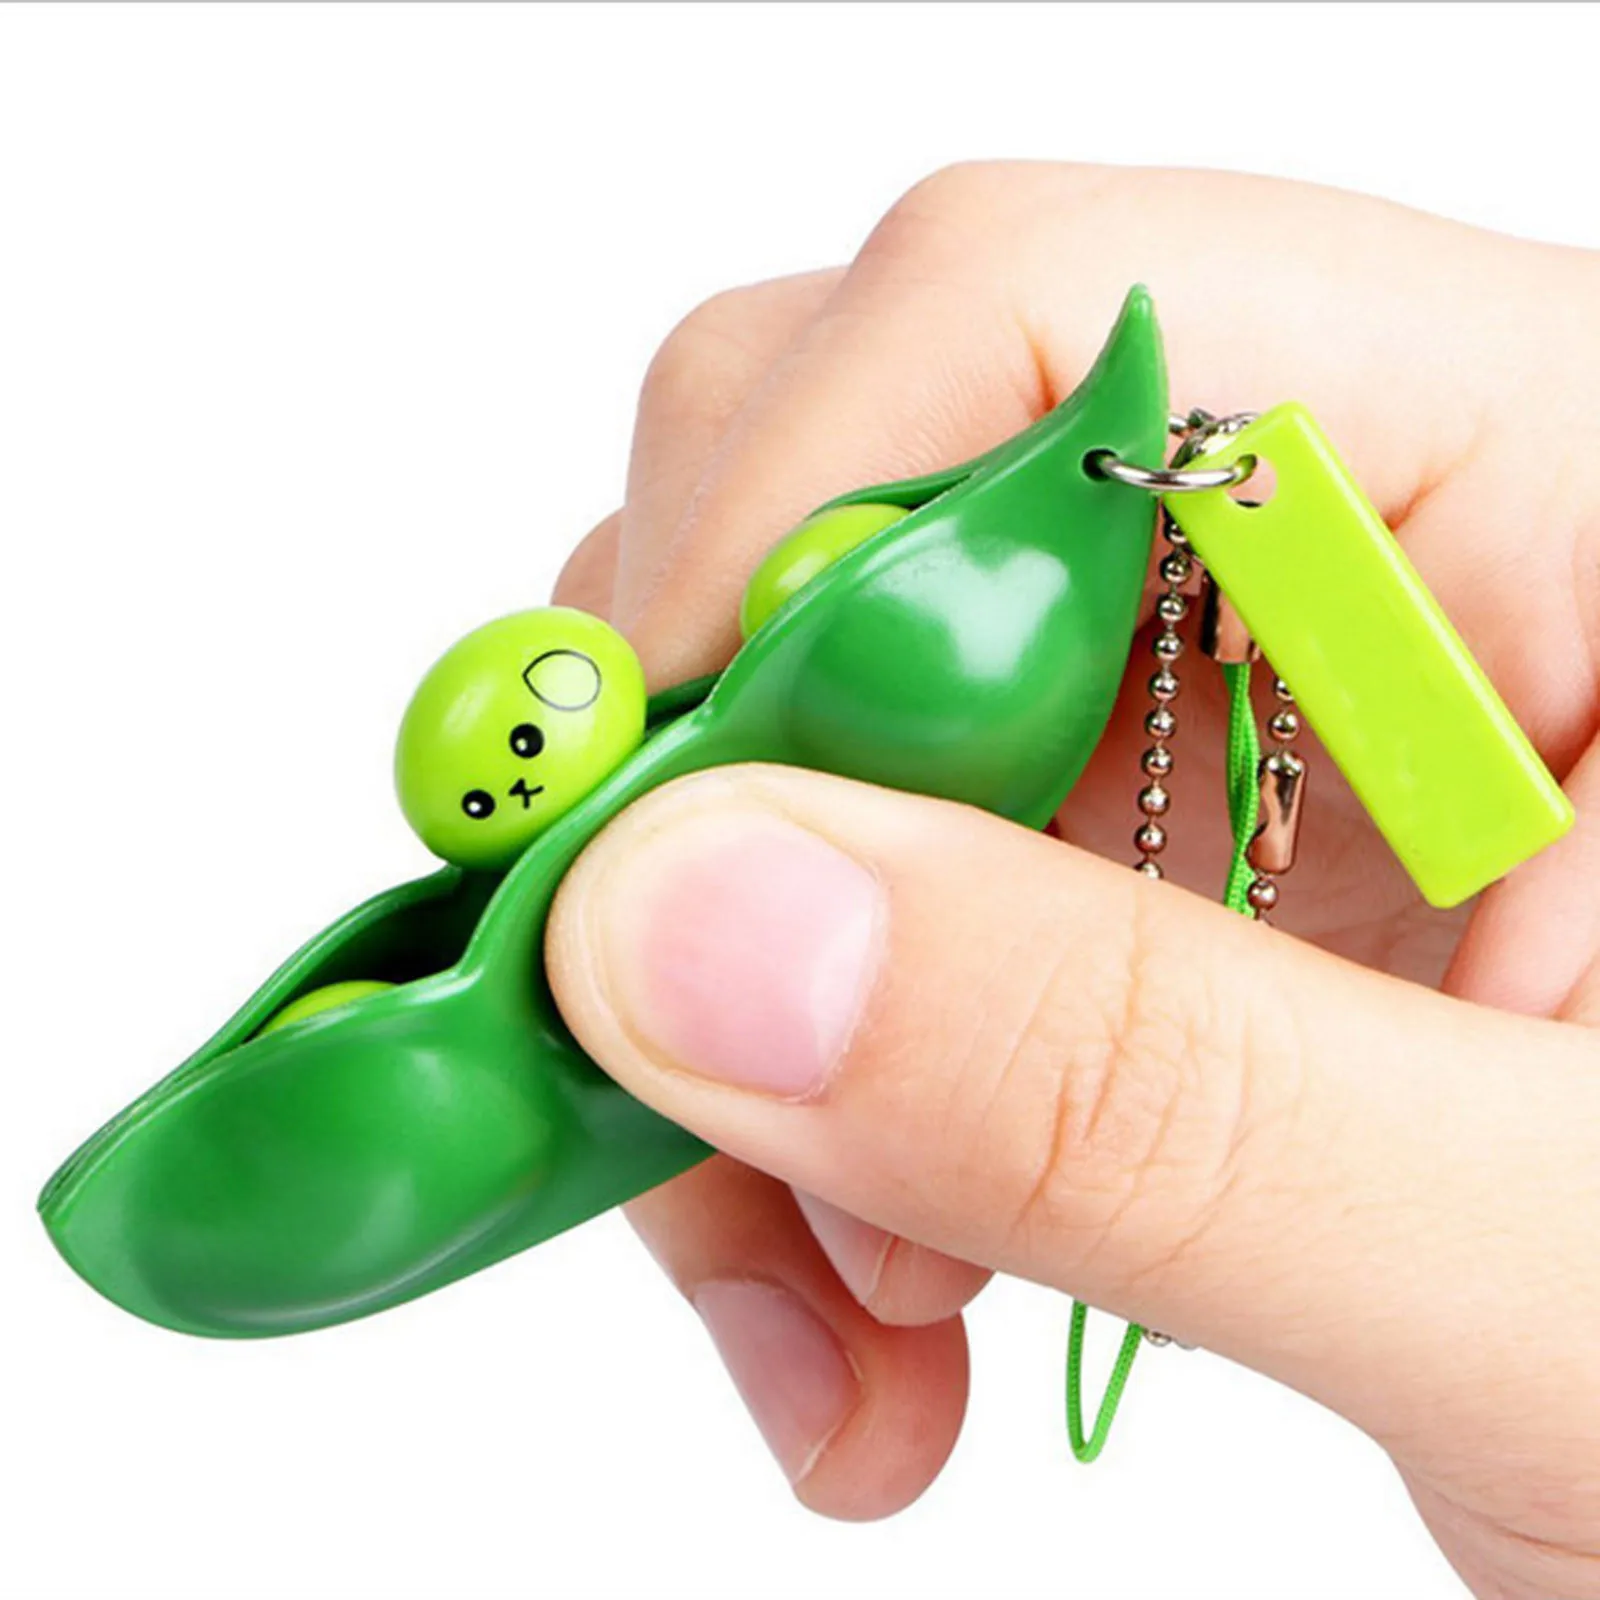 Adult Toy Fidget-Stress-Toys Peas-Beans Keychain Edamame-Toys Decompression Squeeze Squishy